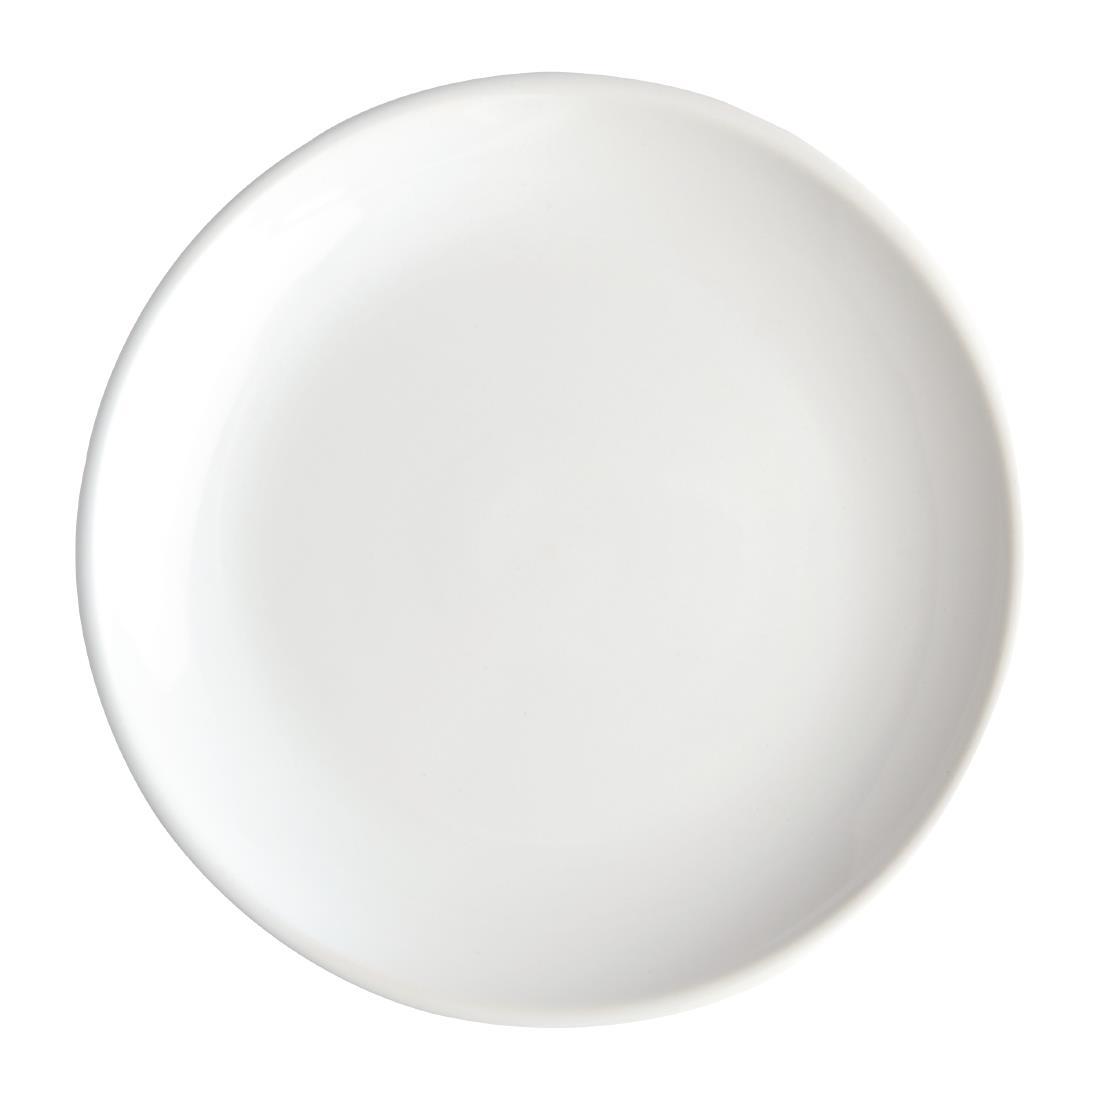 Olympia Cafe Coupe Plate White 250mm (Pack of 6) - HC525  - 3